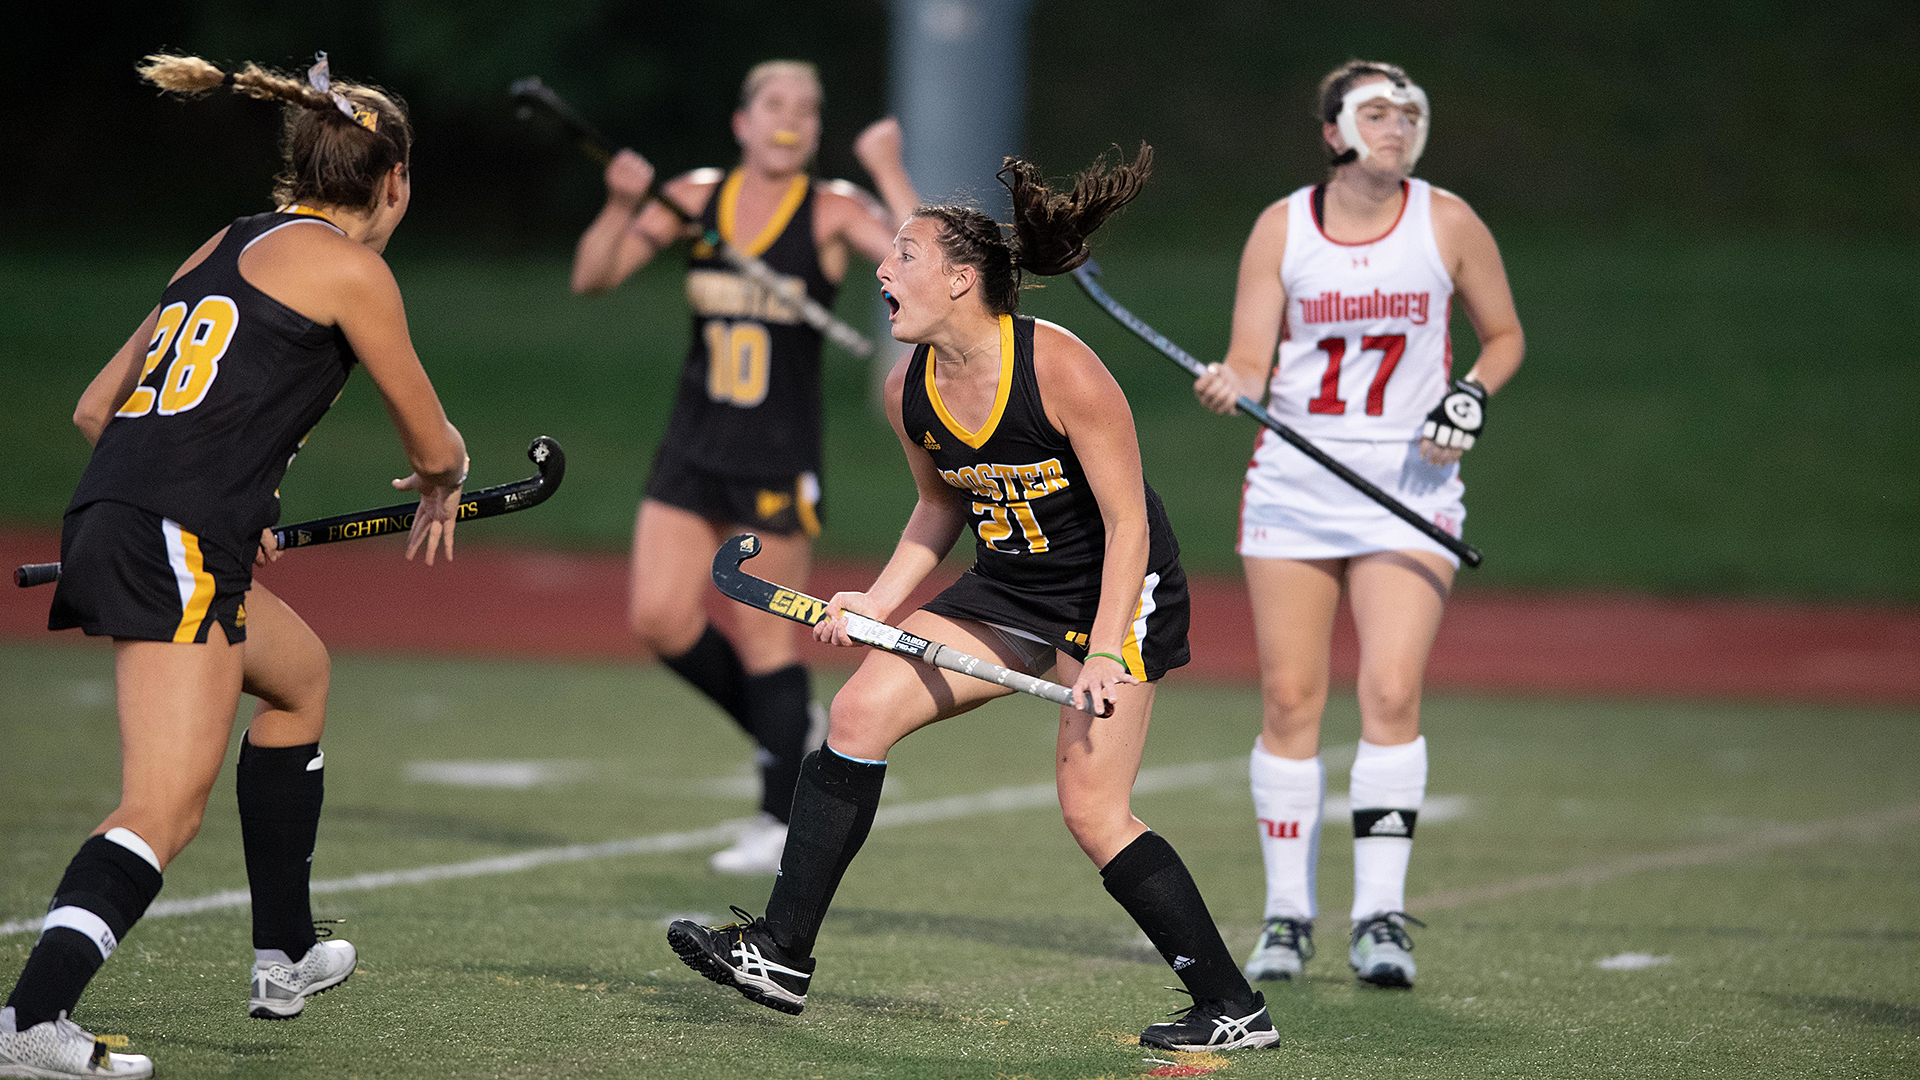 Katie Agatucci College of Wooster field hockey